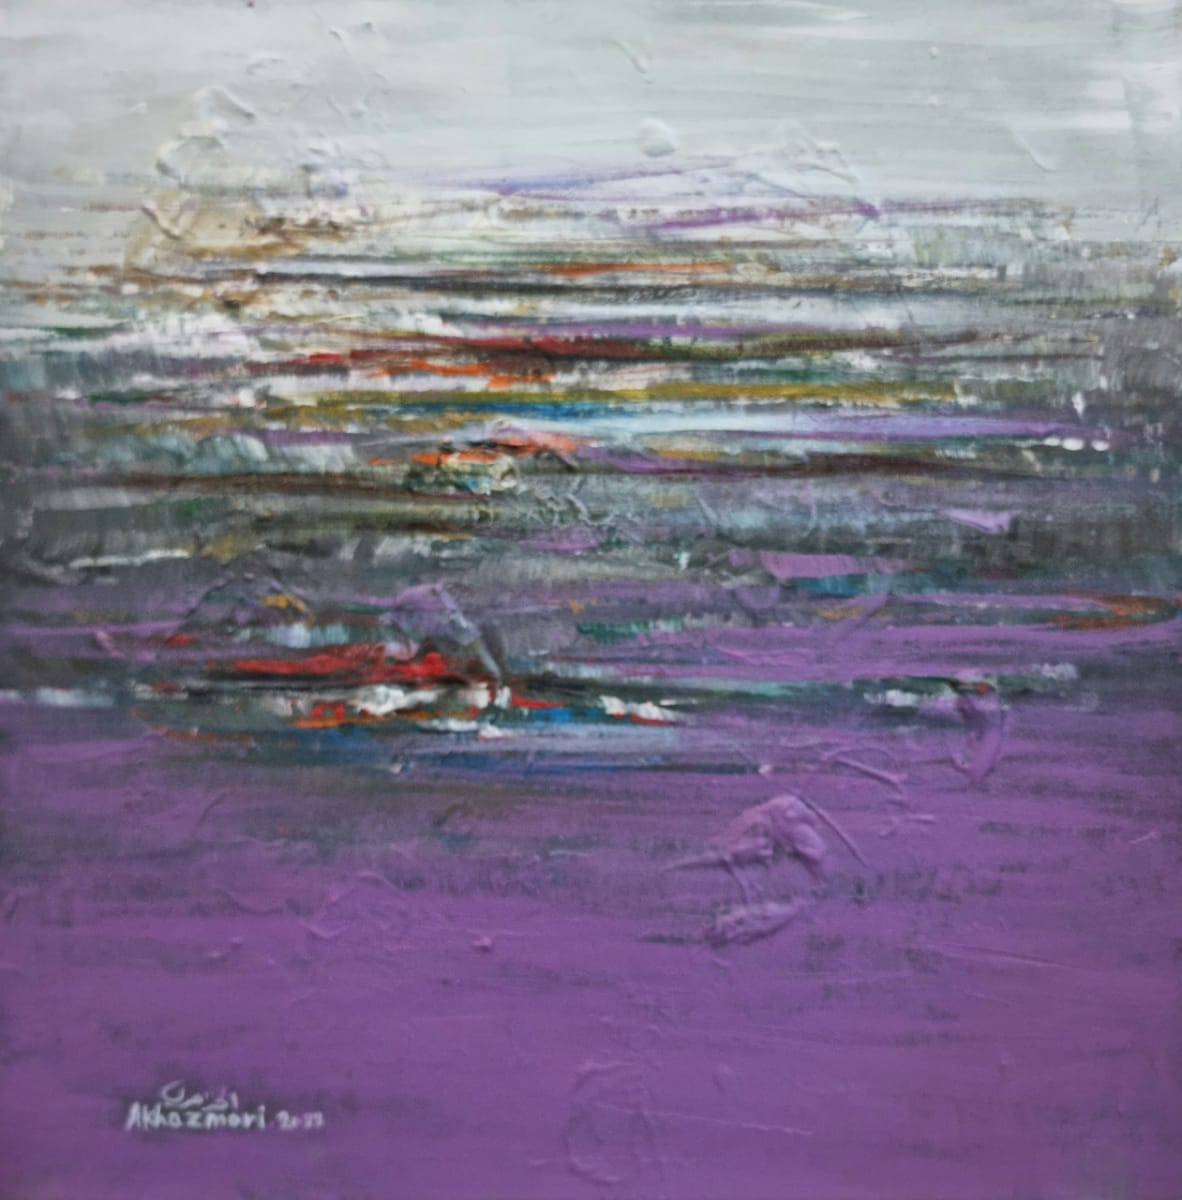 Whispers of Lavender by Ahmed Al Khazmari  Image: "Whispers of Lavender" — An exploration of sensory experiences through abstract expression, where the essence of a lavender field is captured in the quiet interludes of color and texture, offering a tranquil retreat for the observer's mind.





